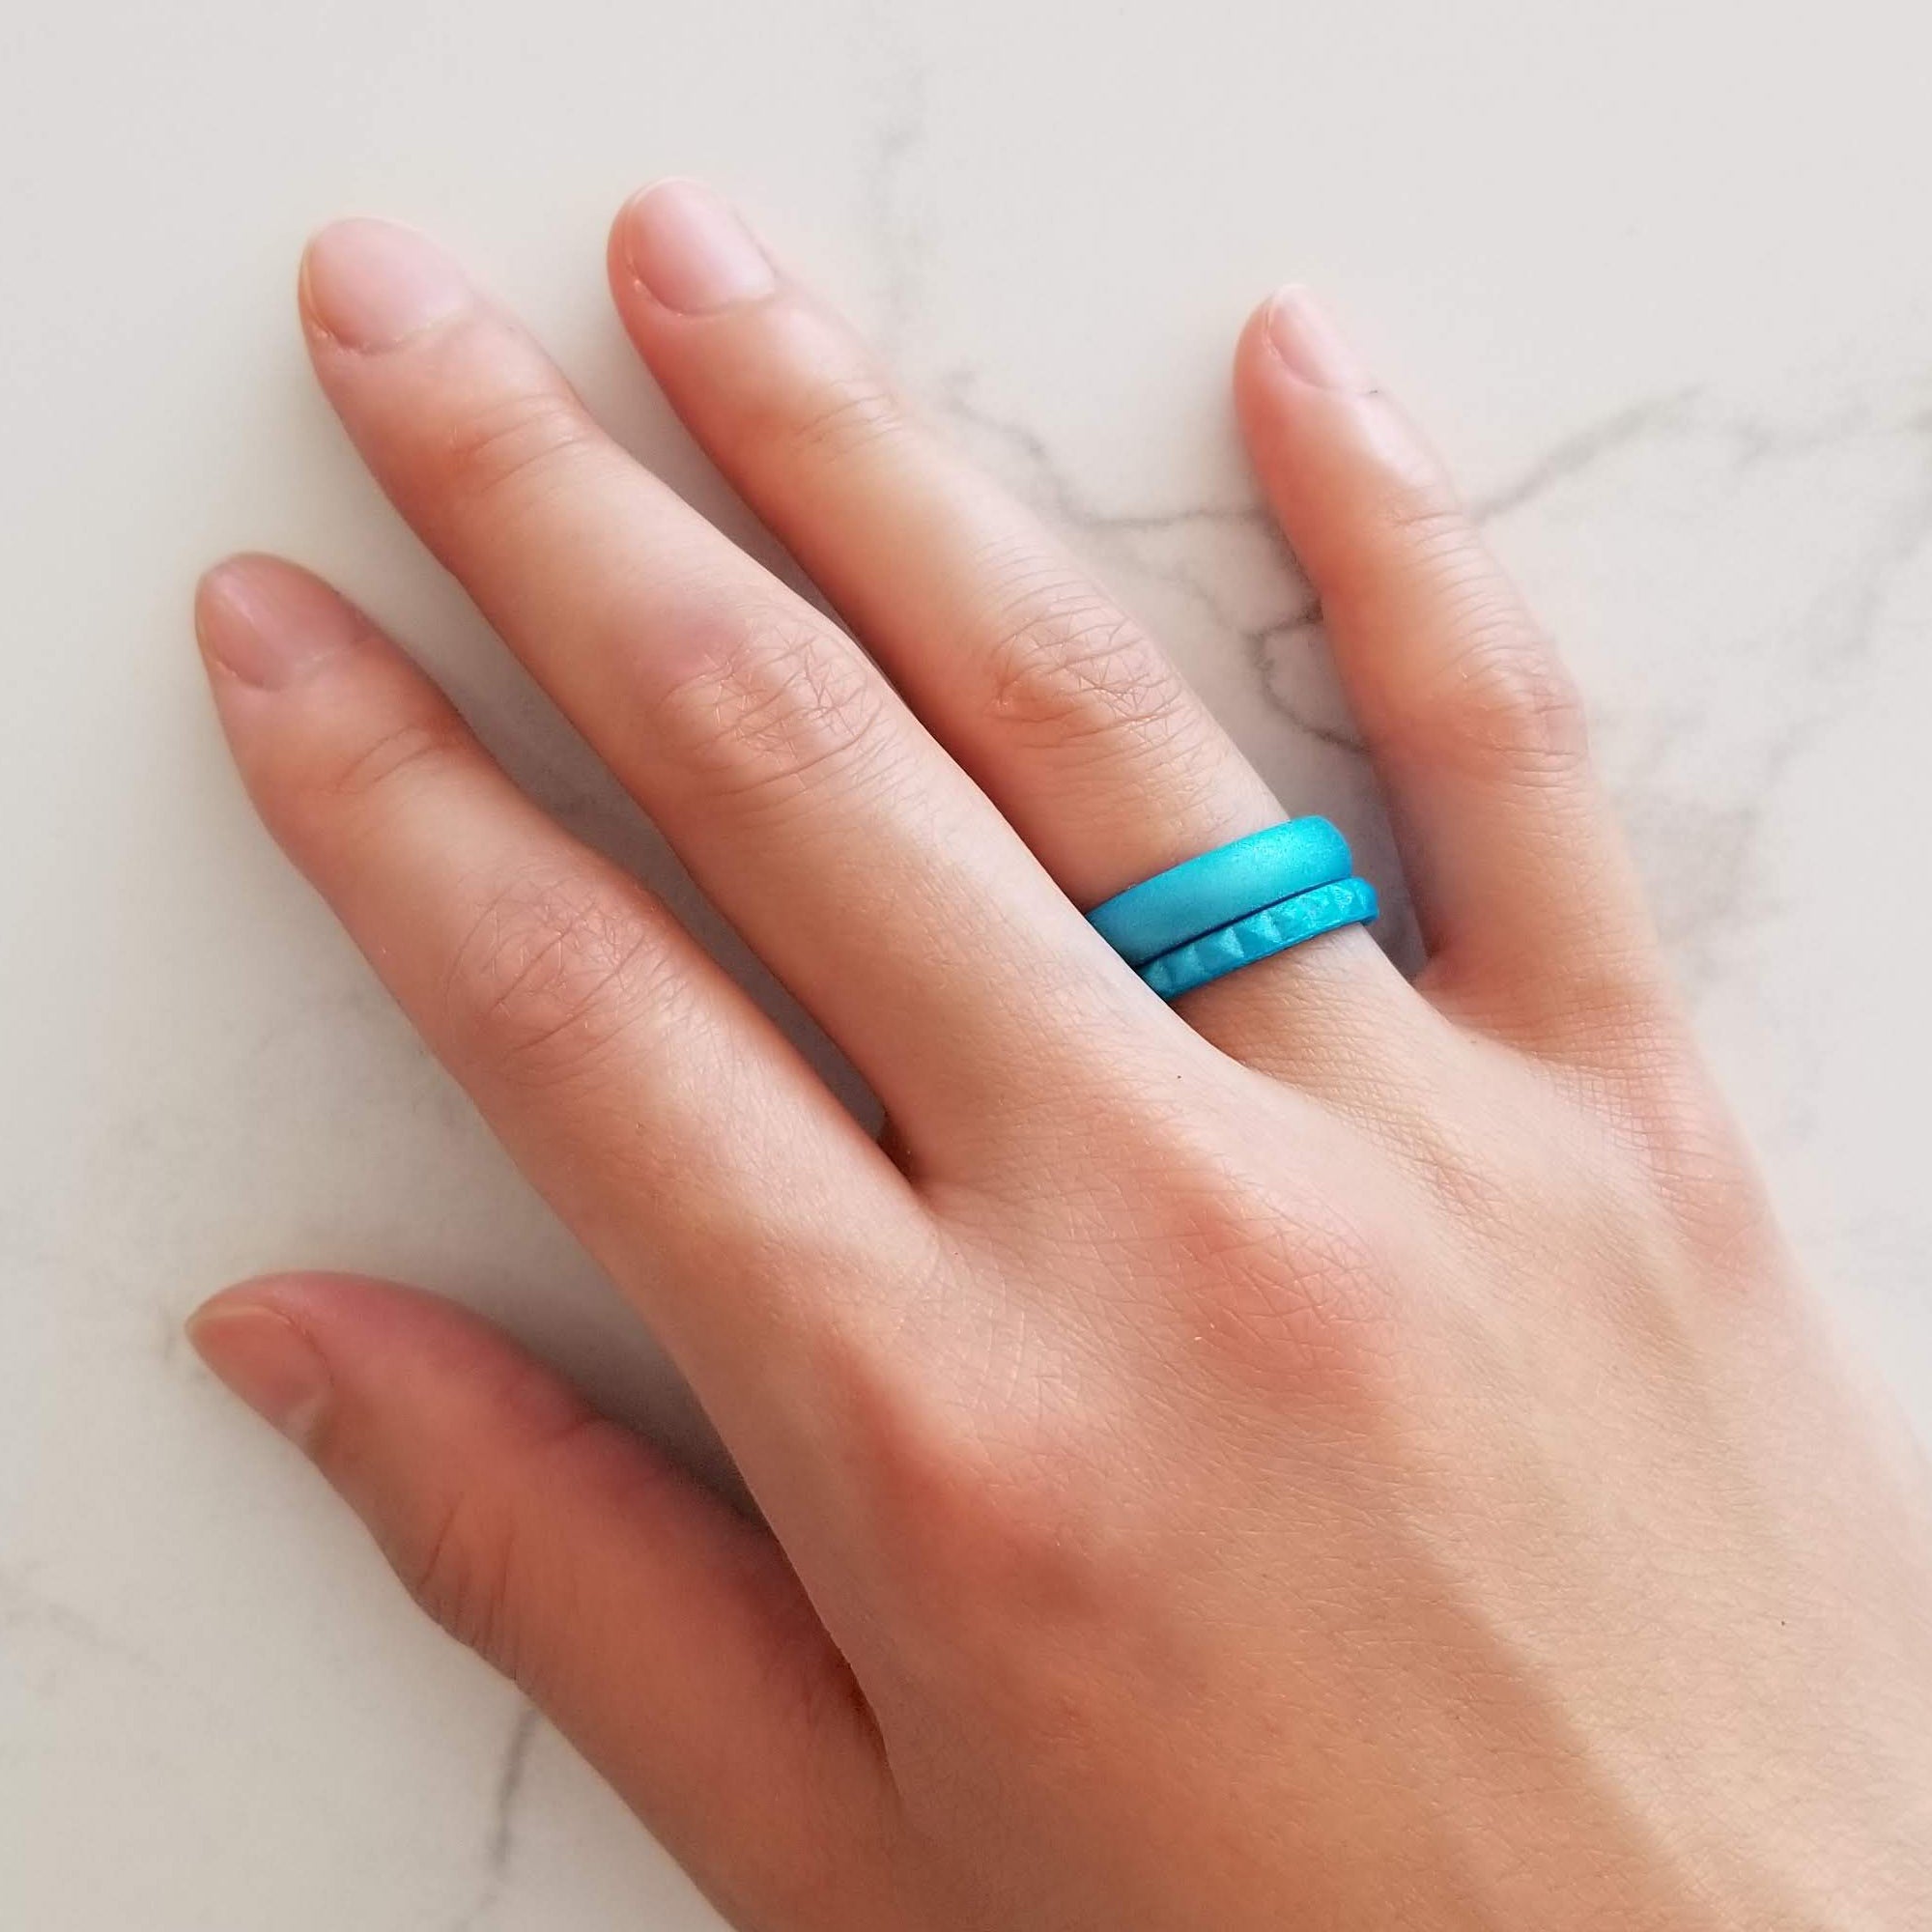 Aquabeads Jewel Rings Review - Serenity You